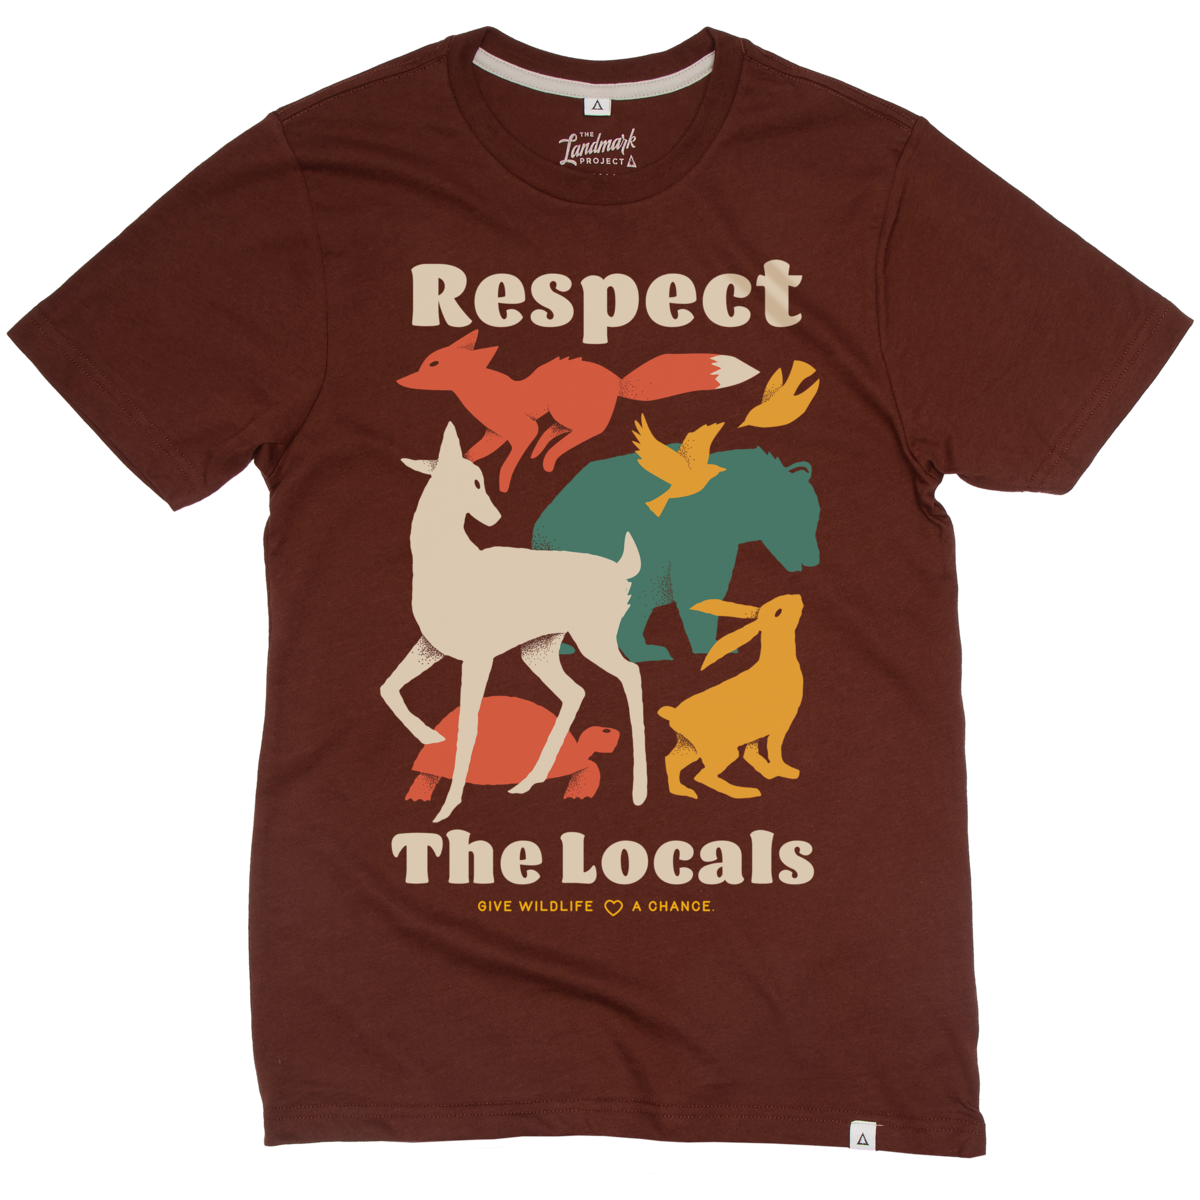 Respect the Locals T-shirt